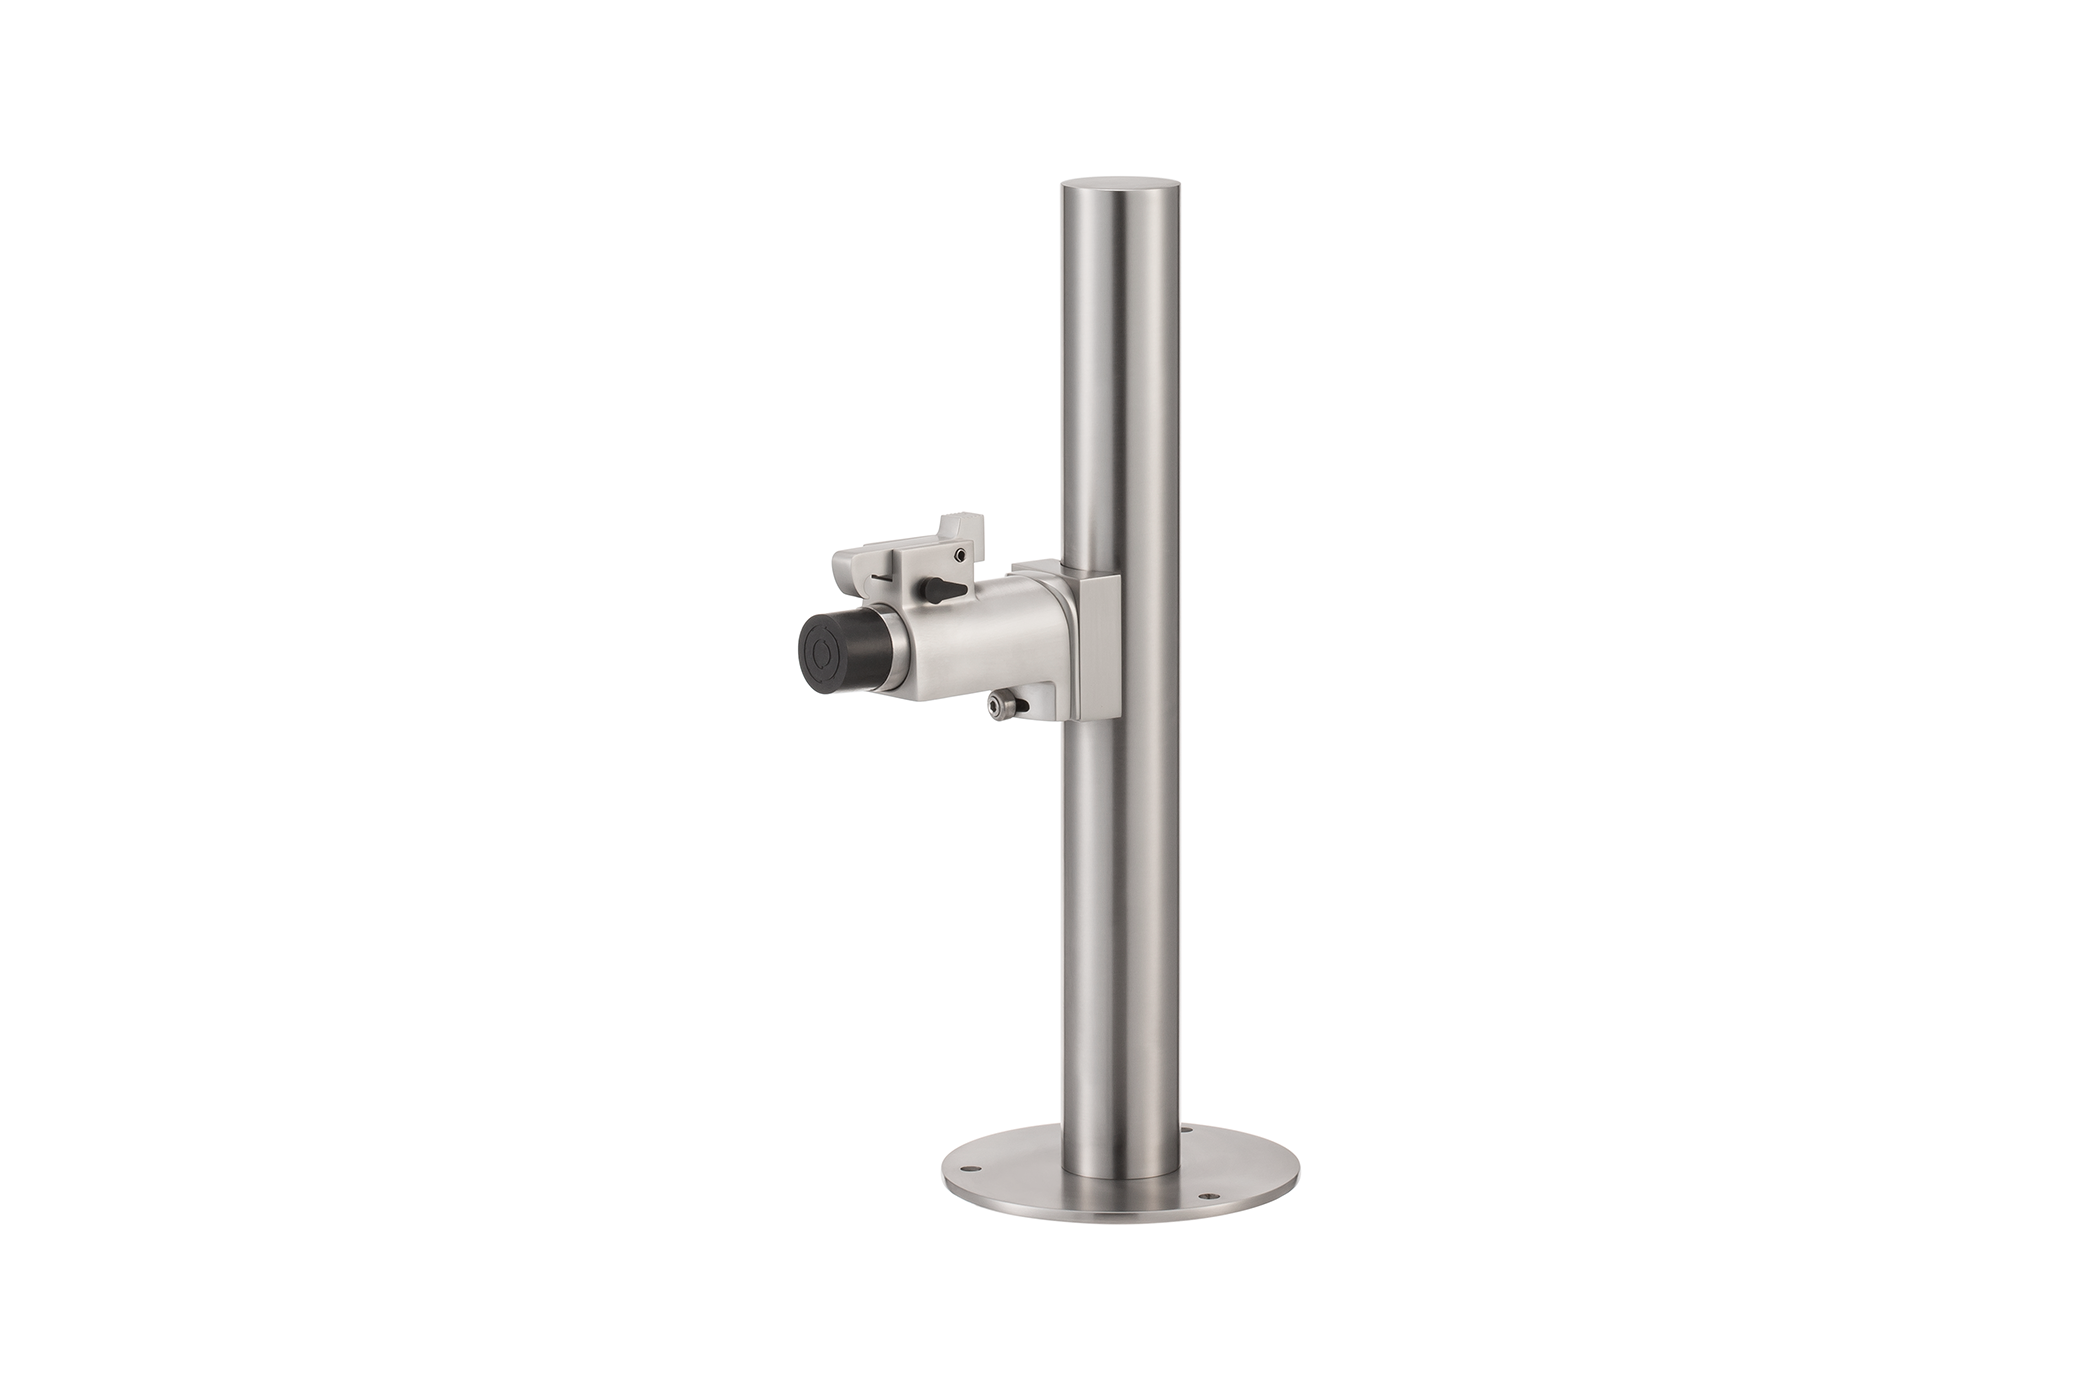 KWS Post and door holder 1921 in finish 82 (stainless steel, matte)